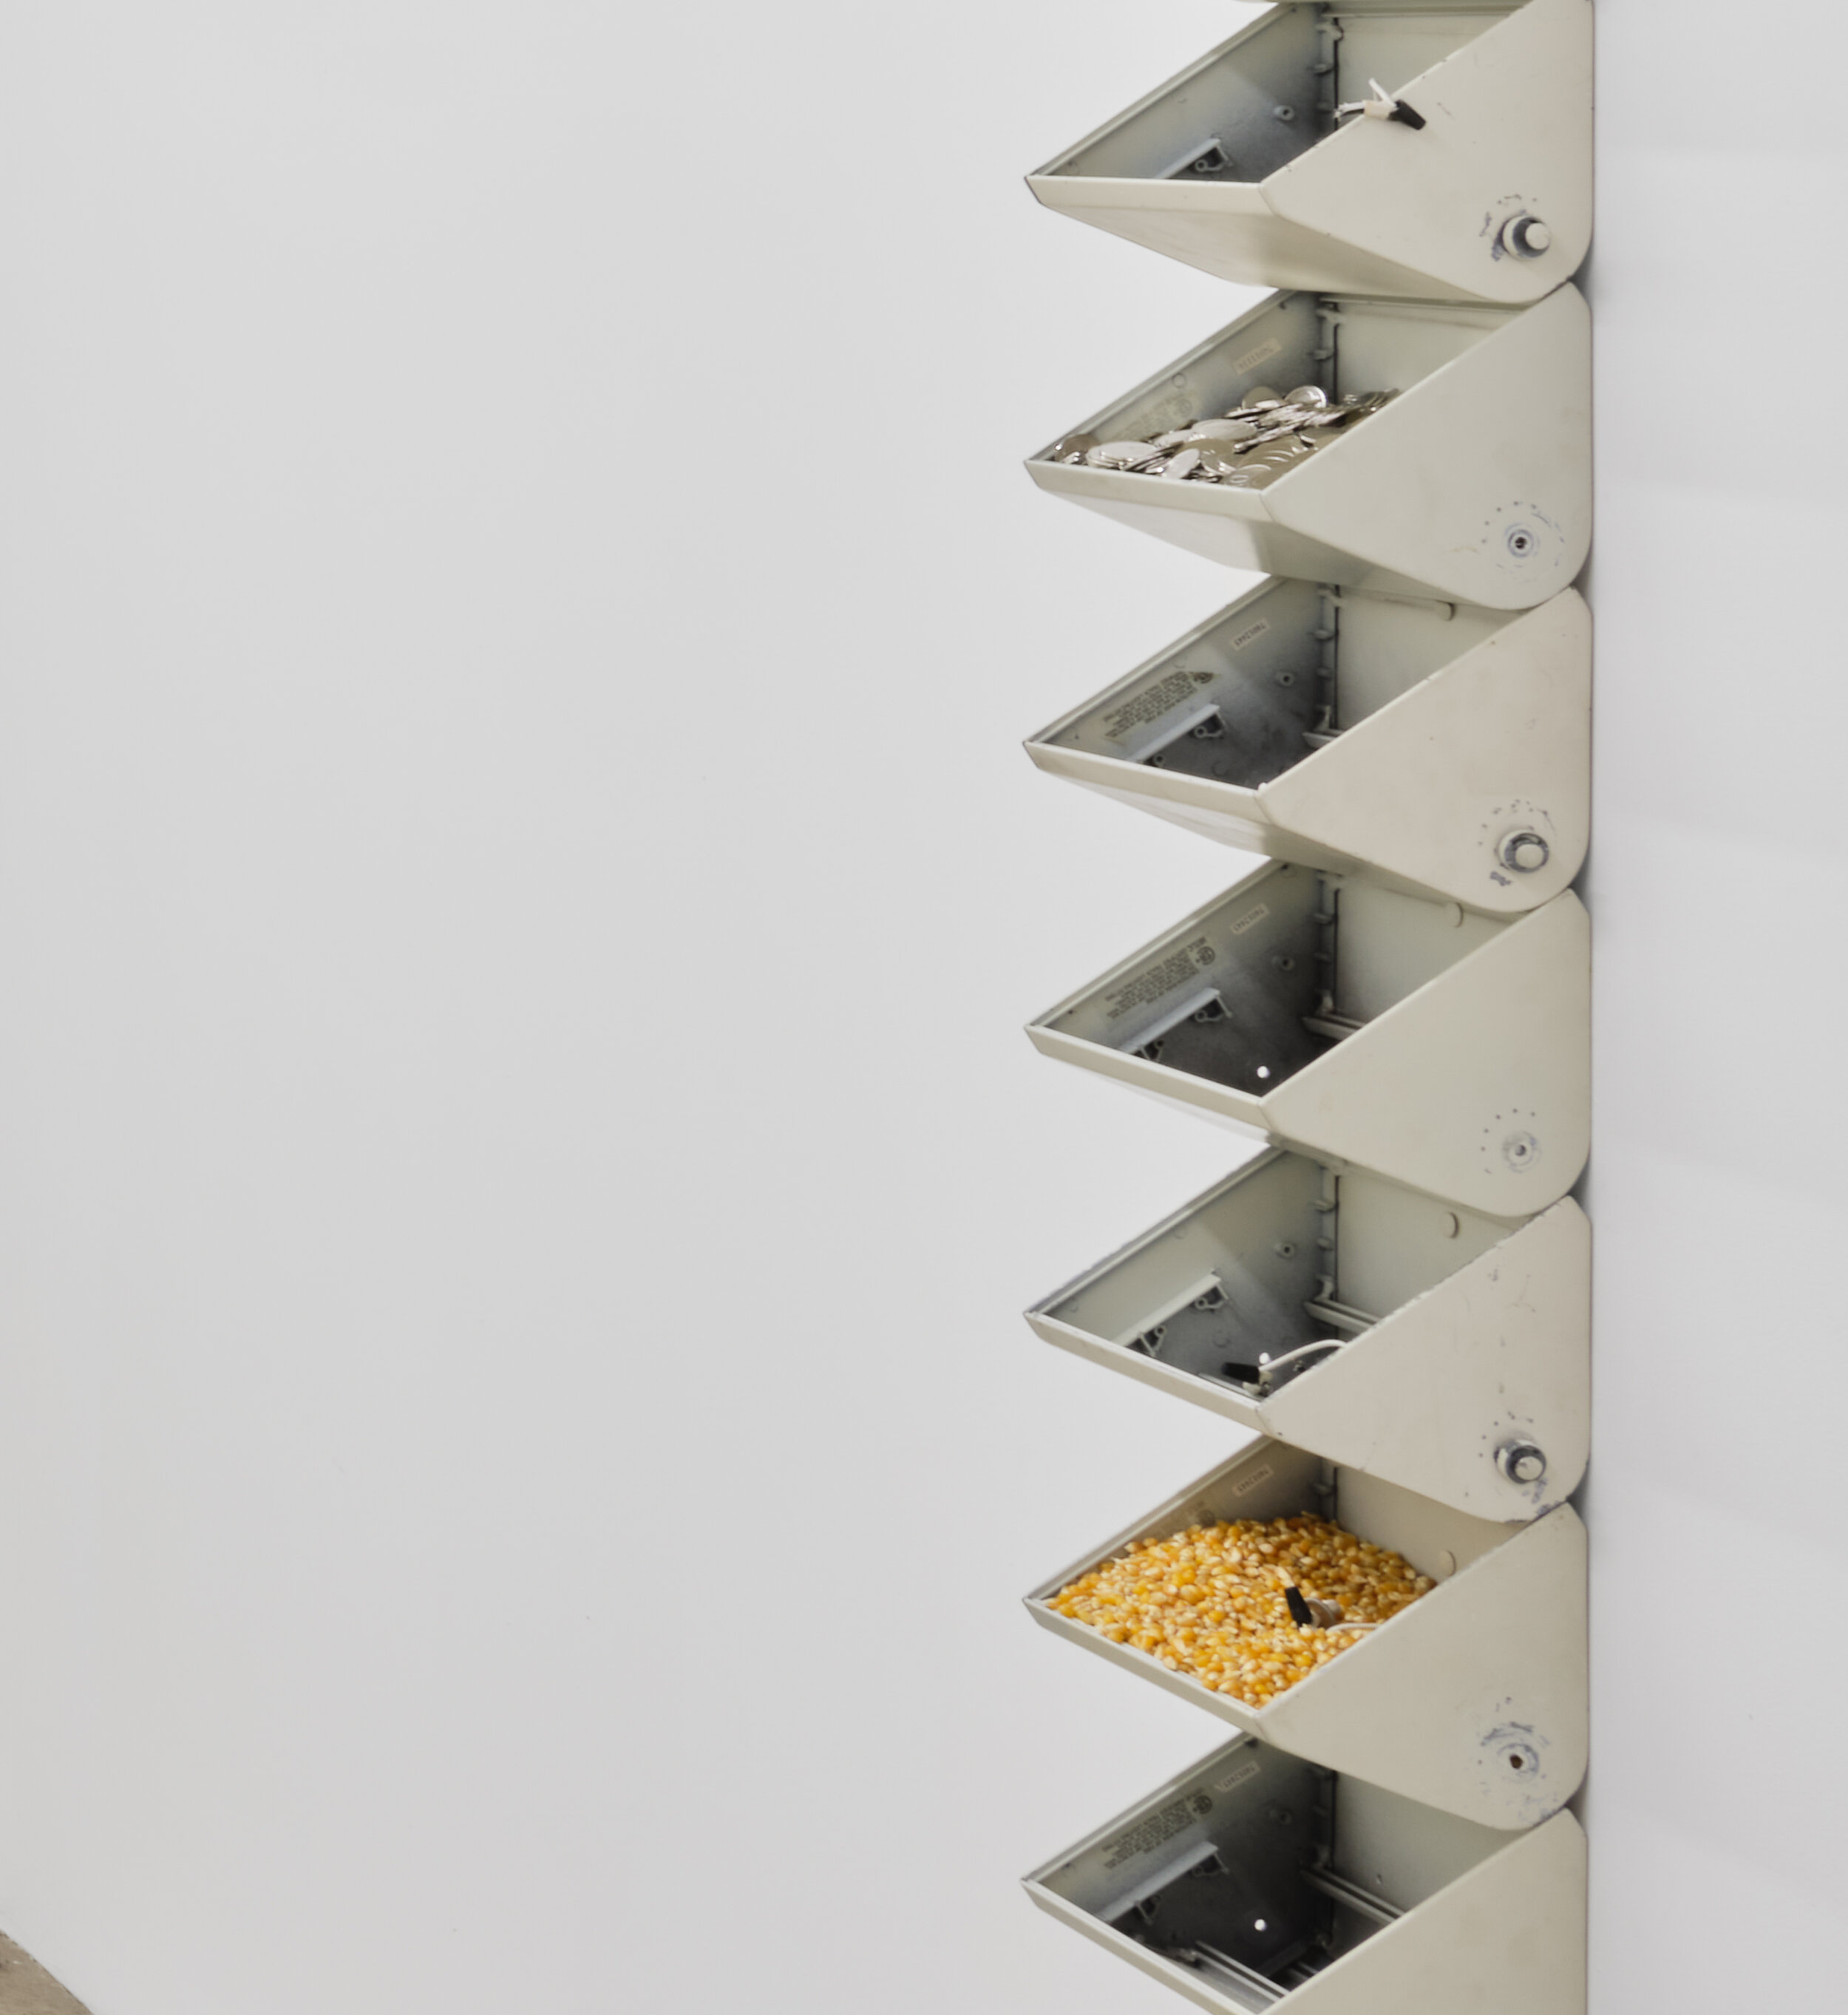  Clare Koury  Feast of the Ascension , 2020 (detail) Track light heads, corn kernels, double cherry tokens, Cosmic Brownies  117 x 12 x 6 inches (297 x 21 x 15 cm)   